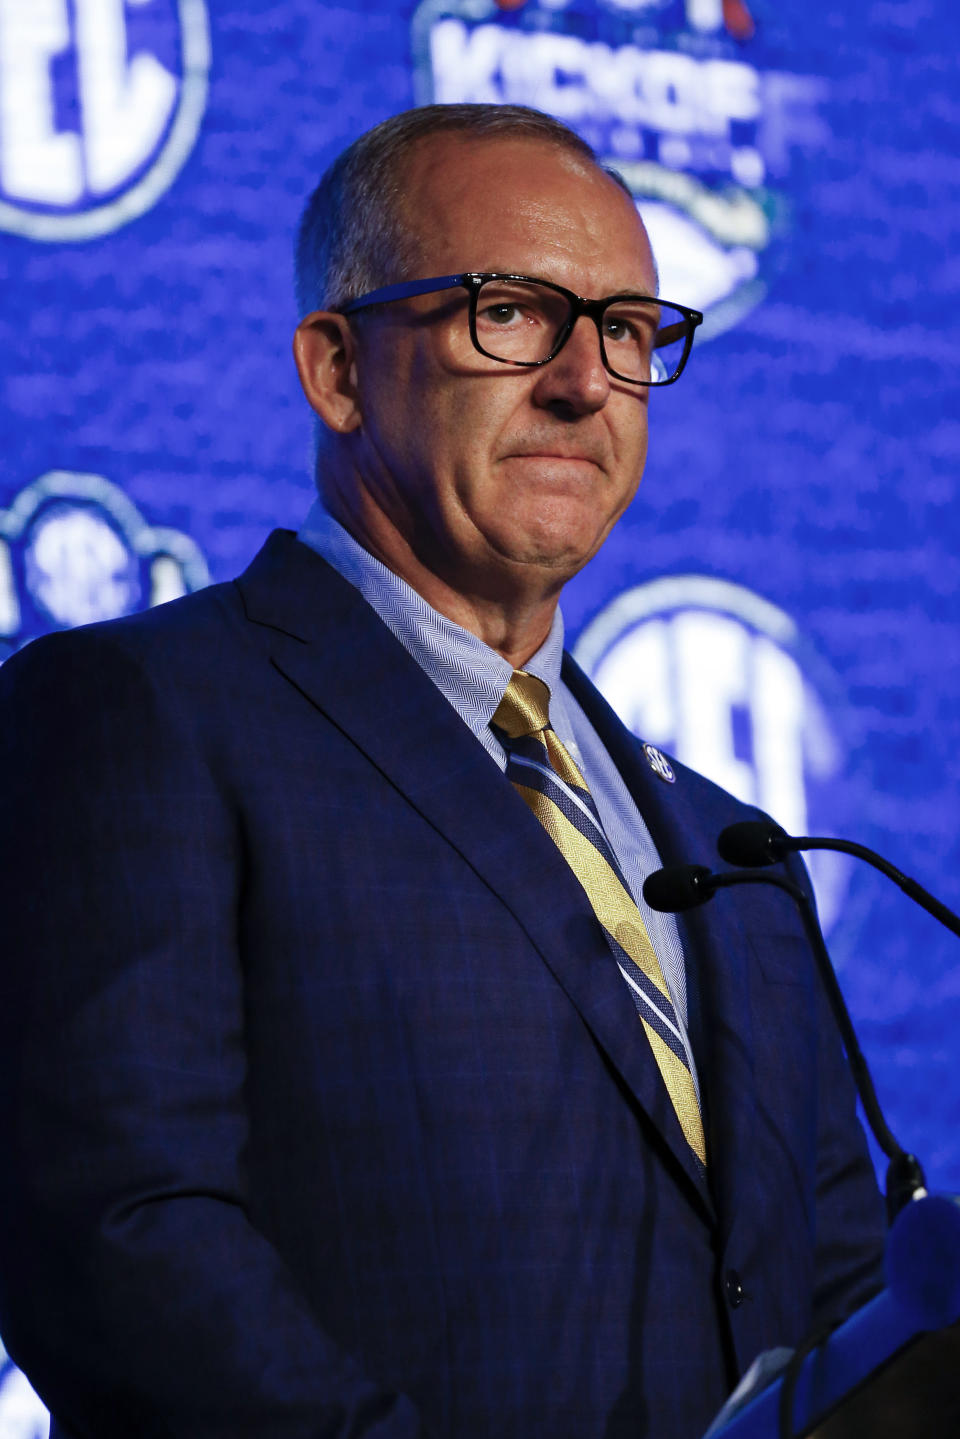 Southeastern Conference commissioner Greg Sankey speaks during the NCAA college football Southeastern Conference Media Days, Monday, July 15, 2019, in Hoover, Ala. (AP Photo/Butch Dill)